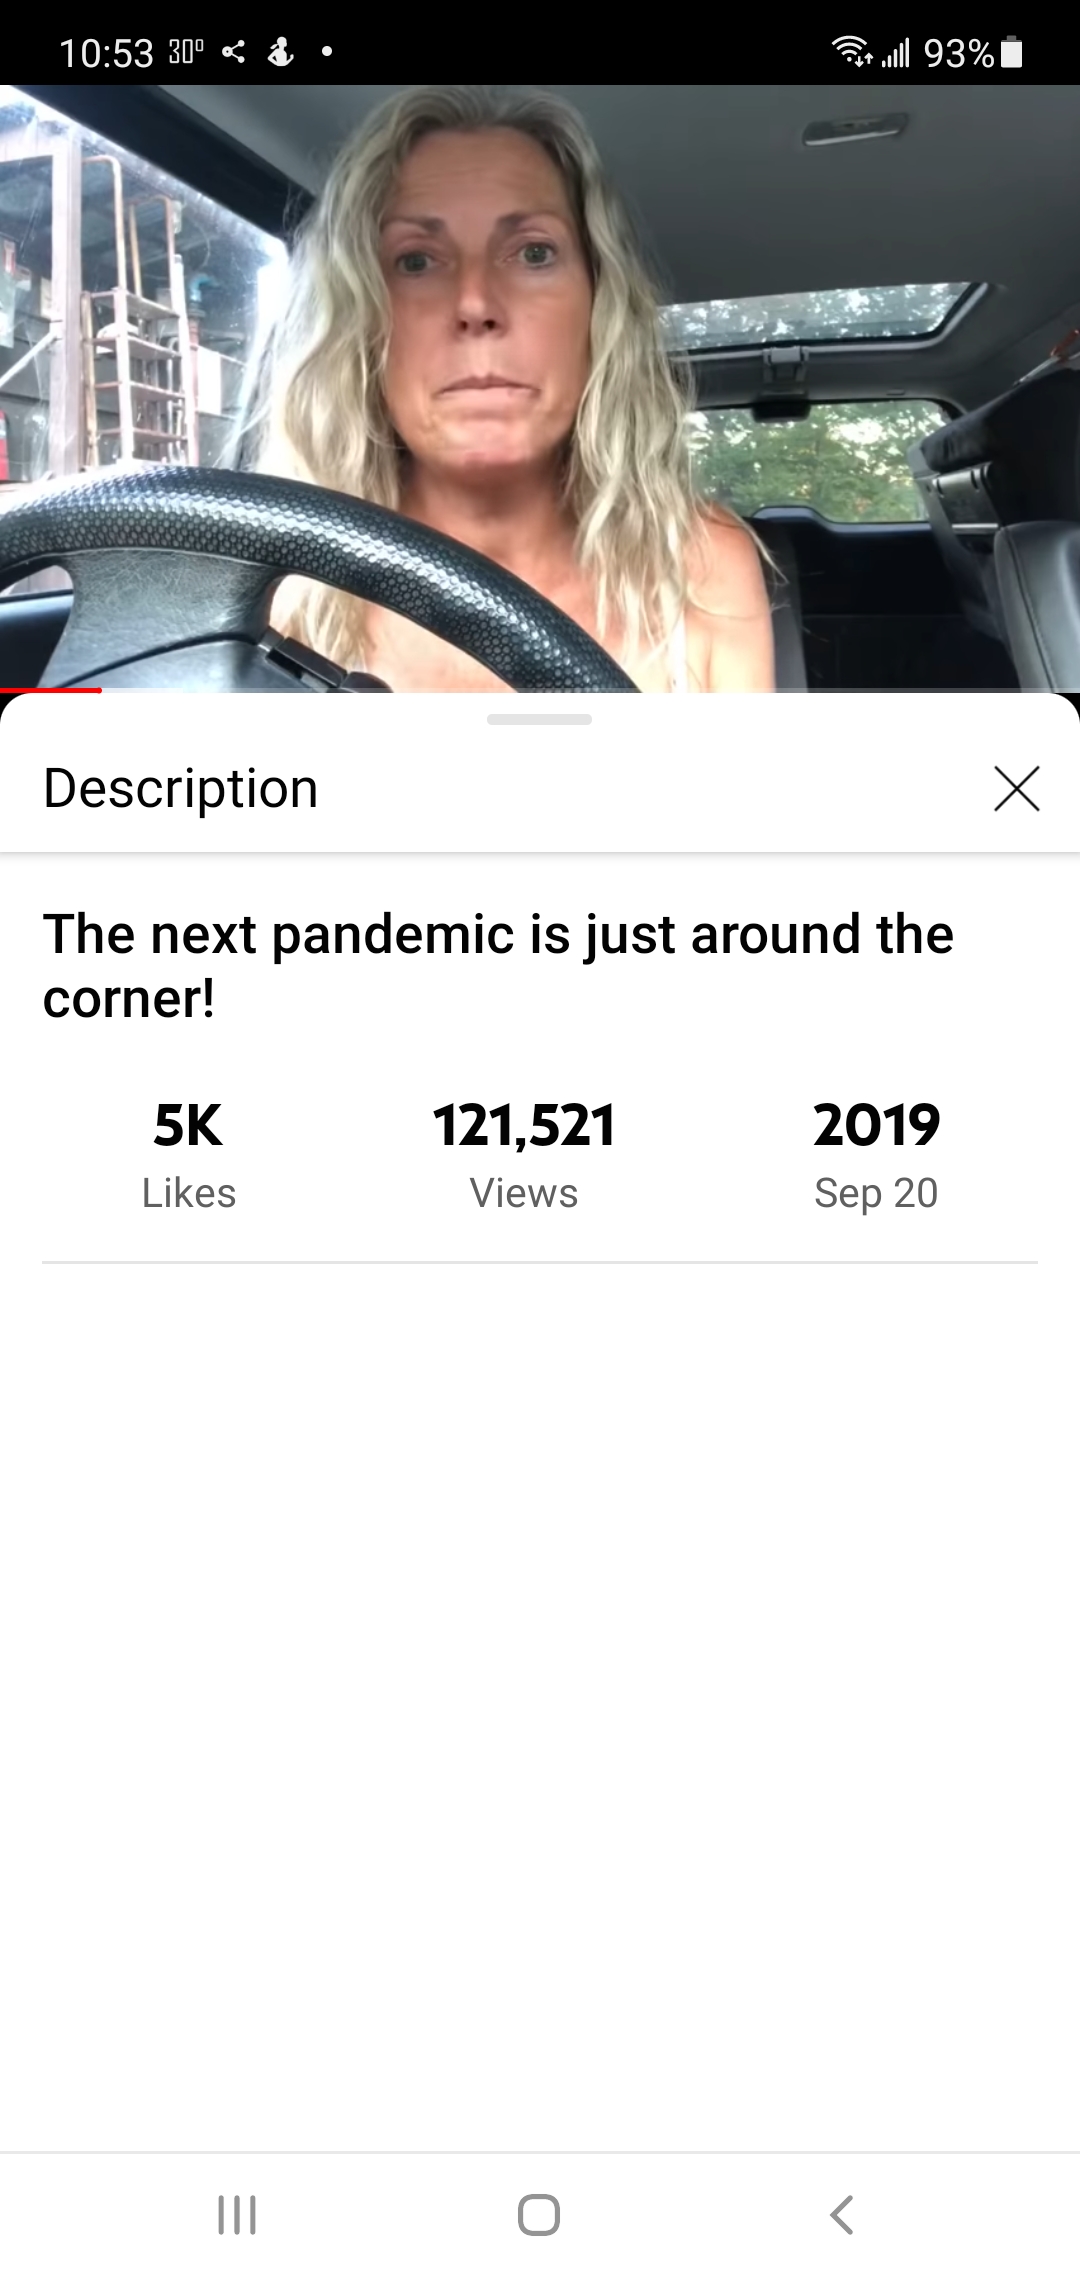 The next pandemic is just around the corner!